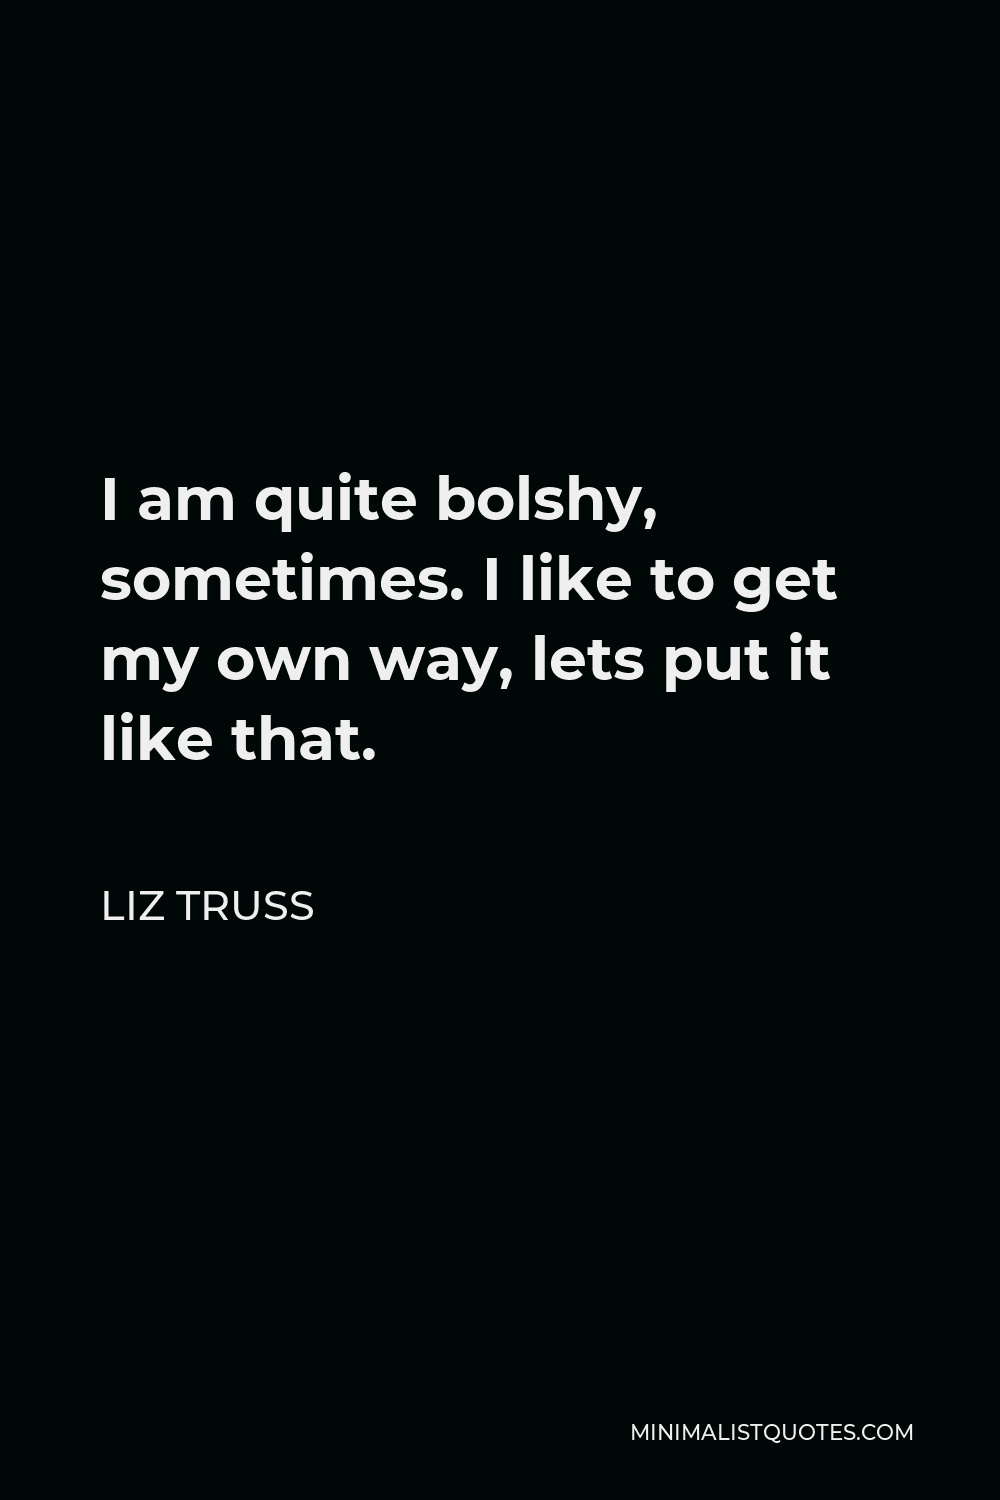 Liz Truss Quote - I am quite bolshy, sometimes. I like to get my own way, lets put it like that.